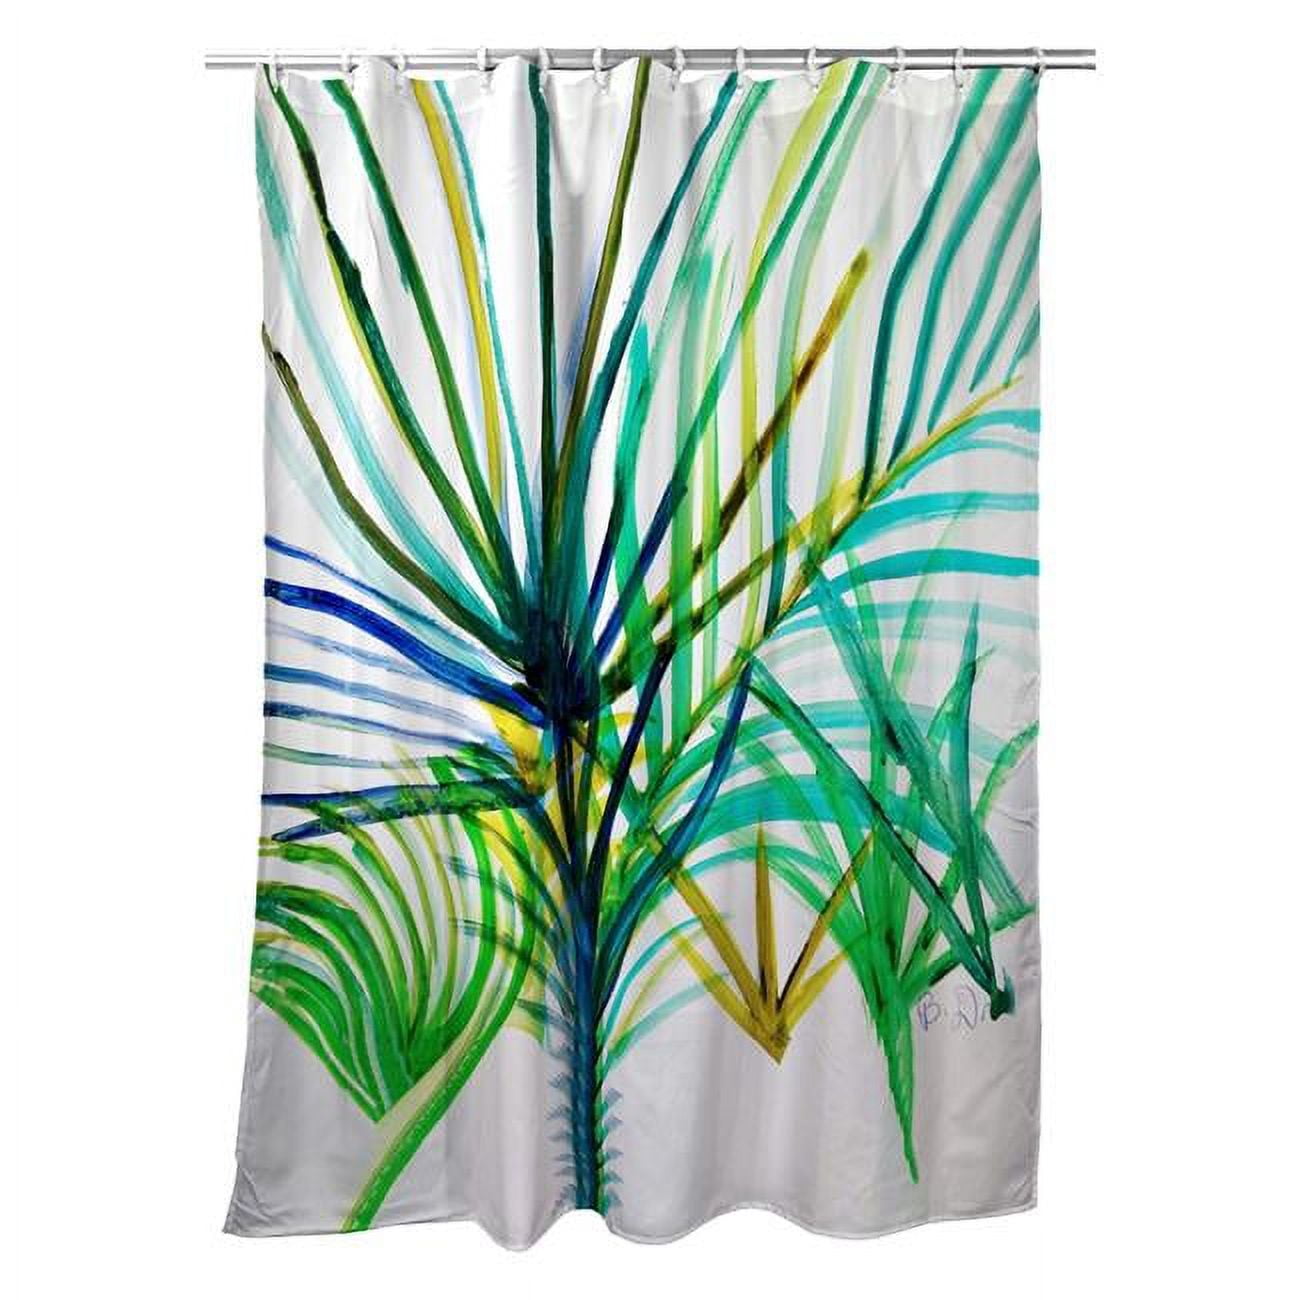 Picture of Betsydrake SH1157 71 x 74 in. Teal Palms Shower Curtain